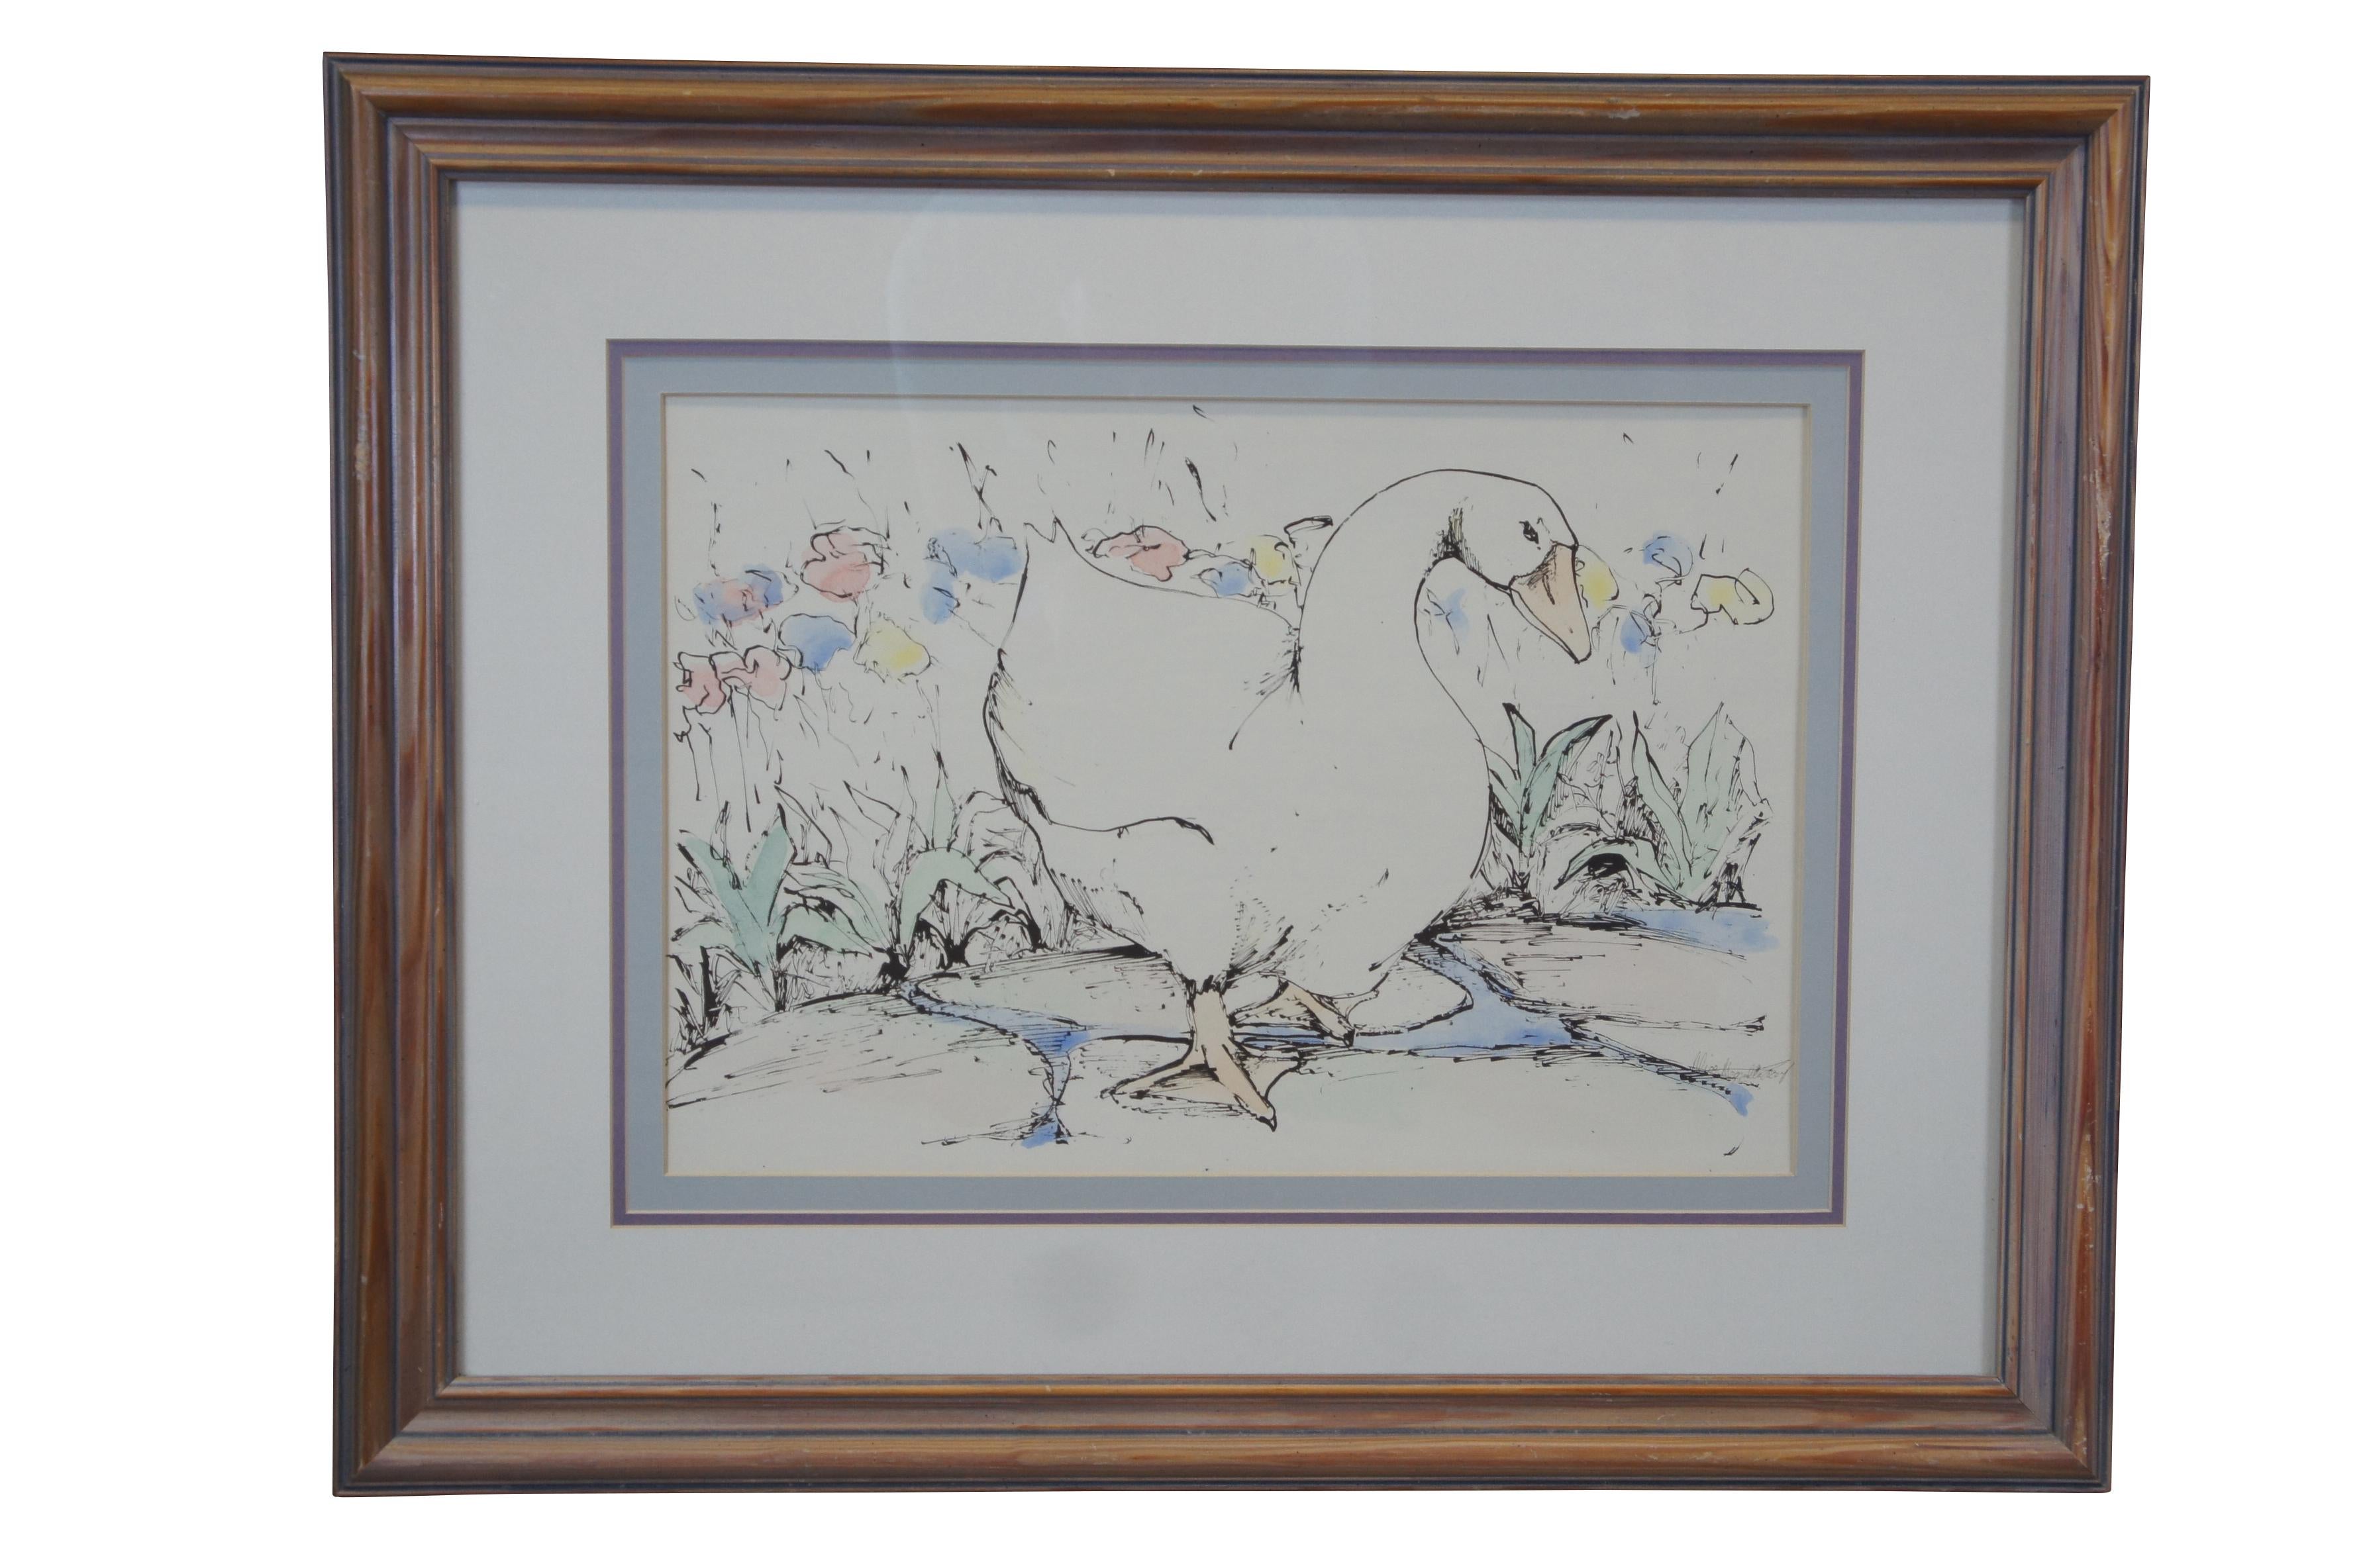 An original pair of watercolors by Alice Magnolia Lacey, circa last quarter 20th century. Each painting features a goose in stride on a stone walkway with flowers. Signed along the right. Framed in oak.

Measures: 29.5